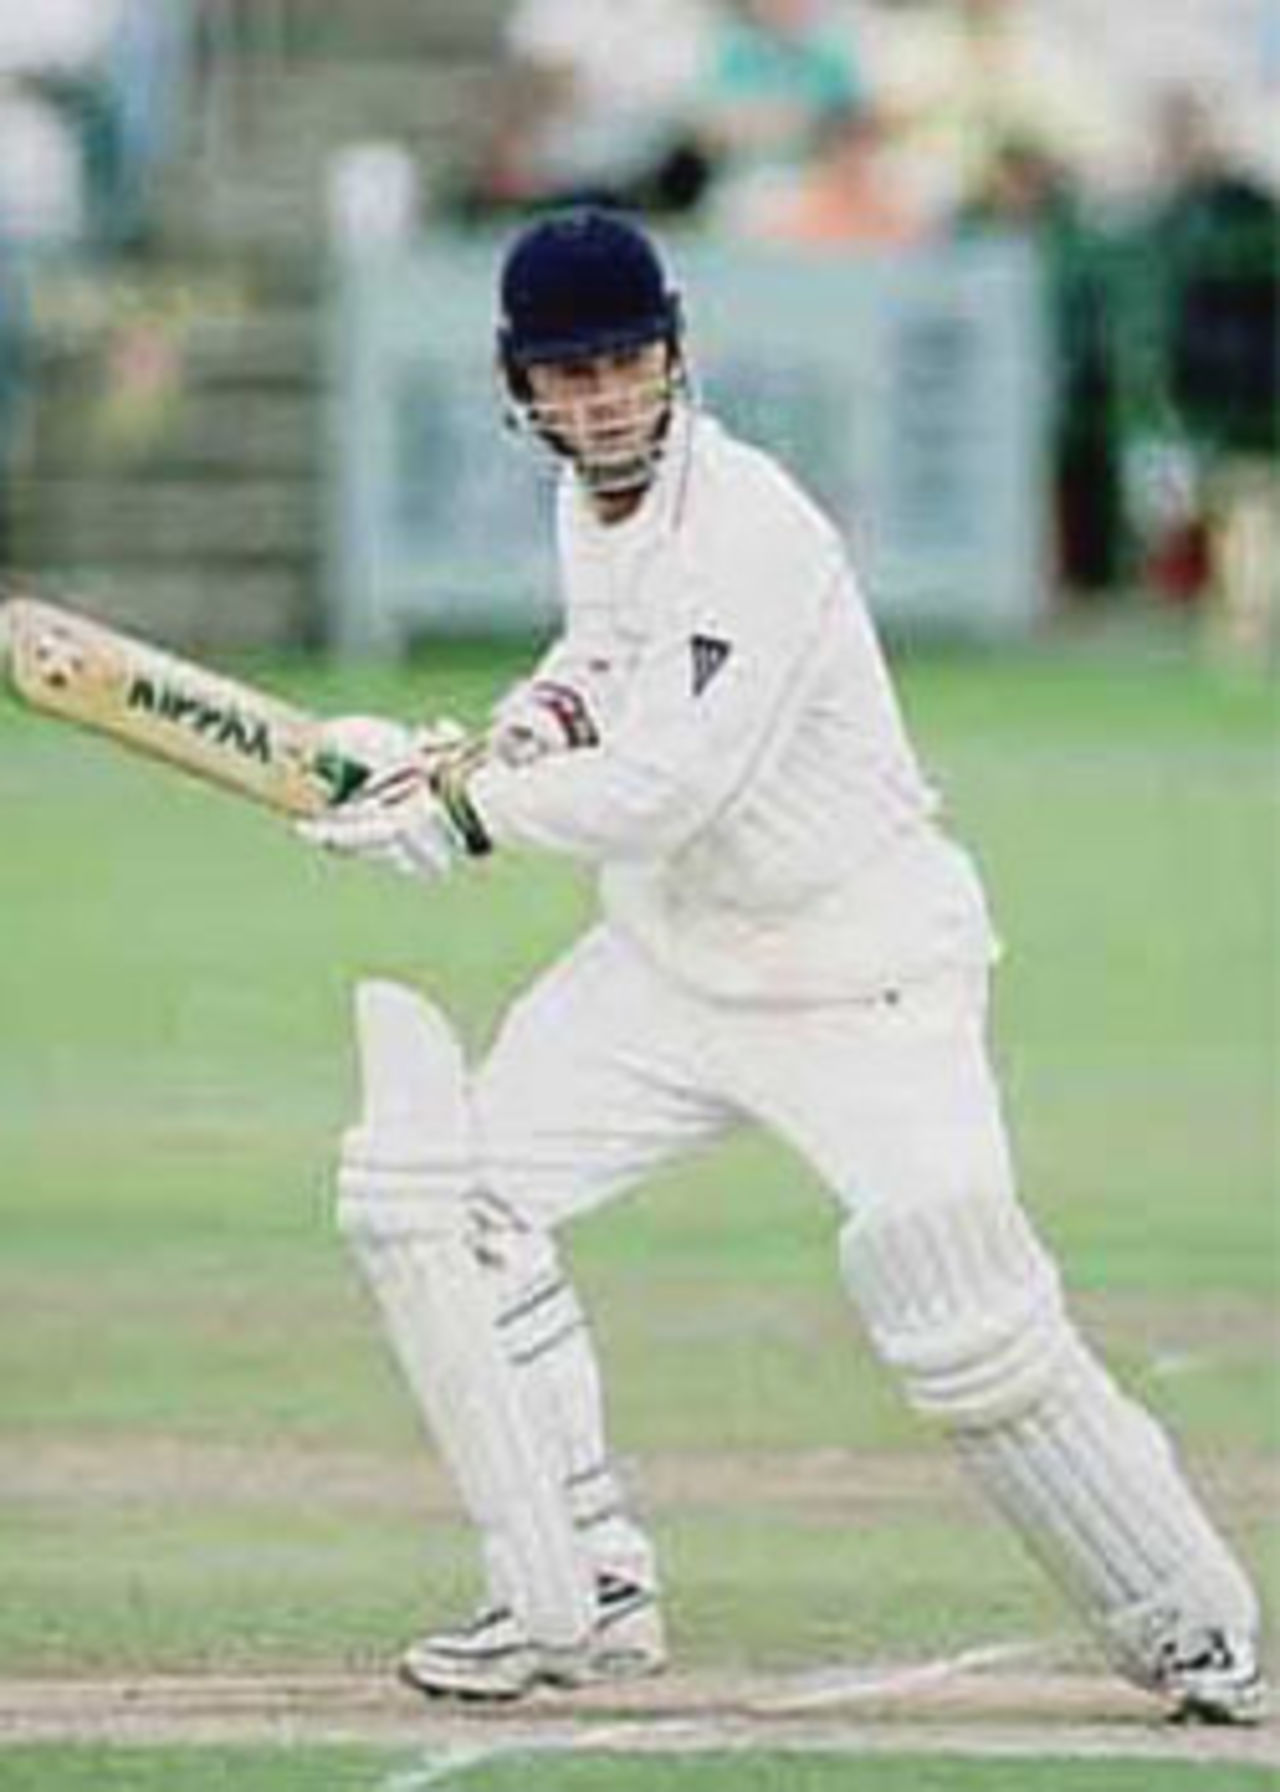 Gary Keedy square cuts, PPP healthcare County Championship Division One, 2000, Lancashire v Kent, Old Trafford, Manchester, 17-20 August 2000(Day 3).